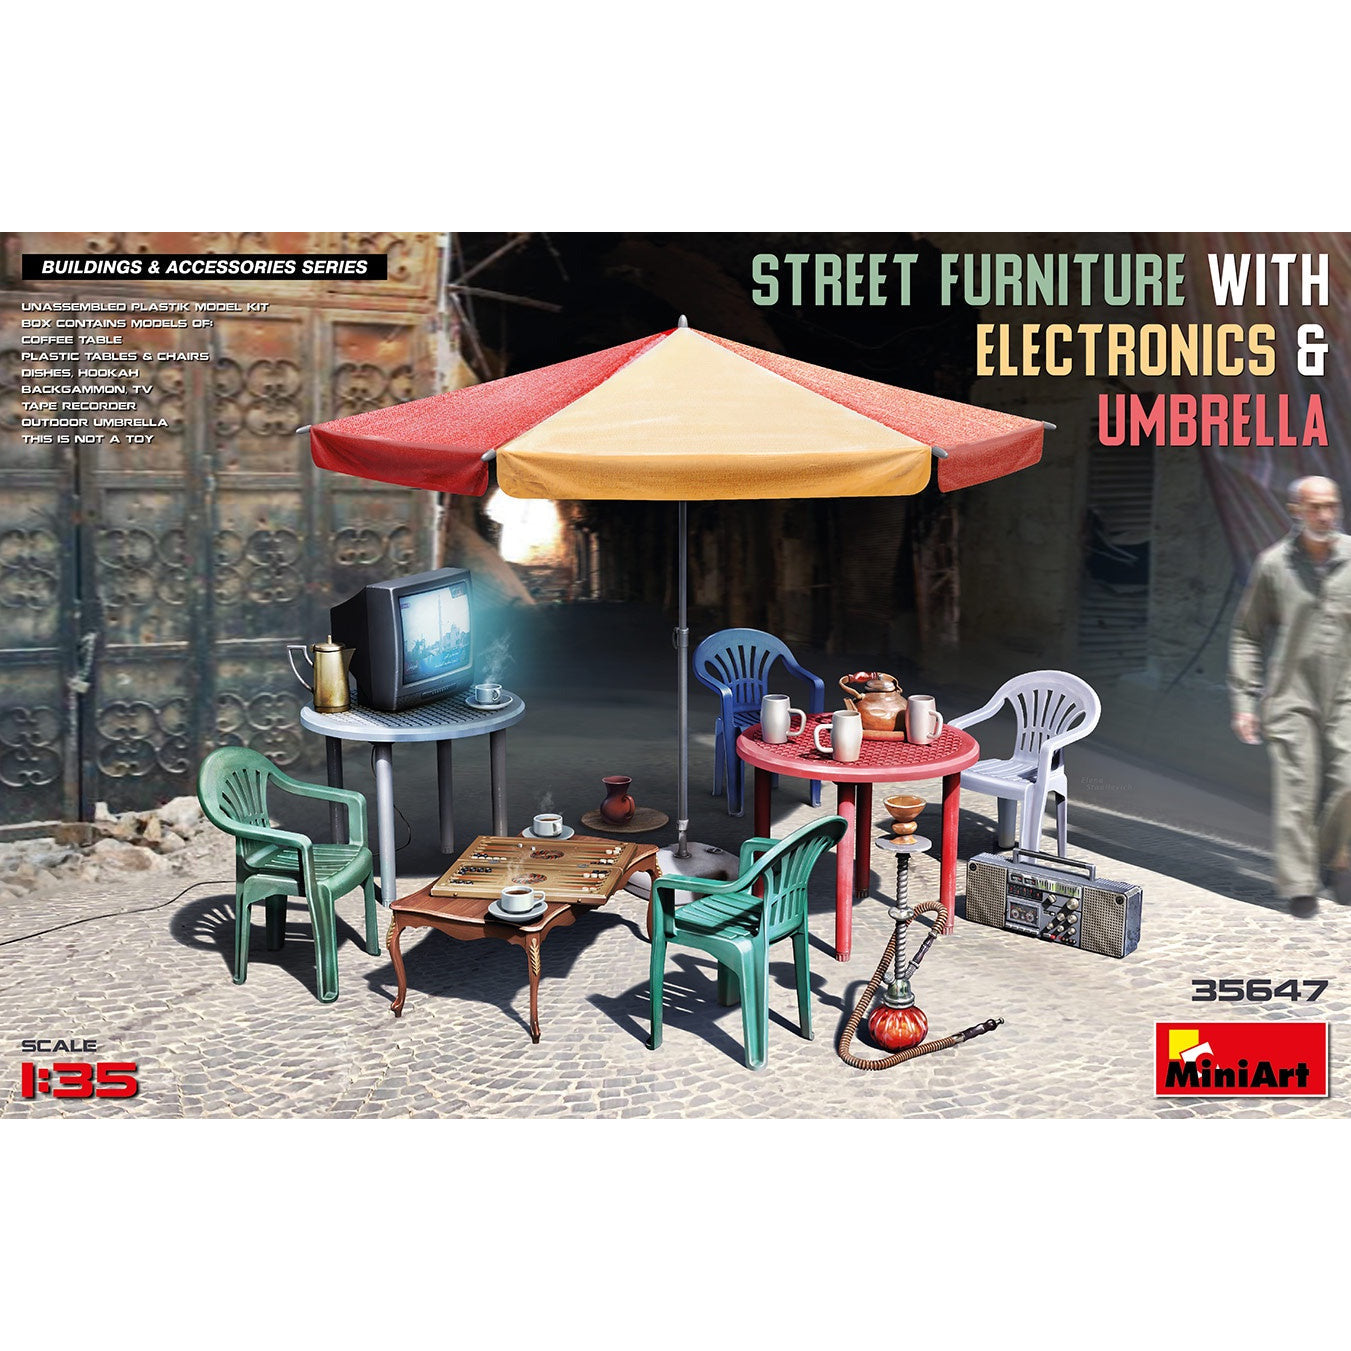 Street Furniture with Electronics & Umbrella #35647 1/35 Scenery Kit by MiniArt